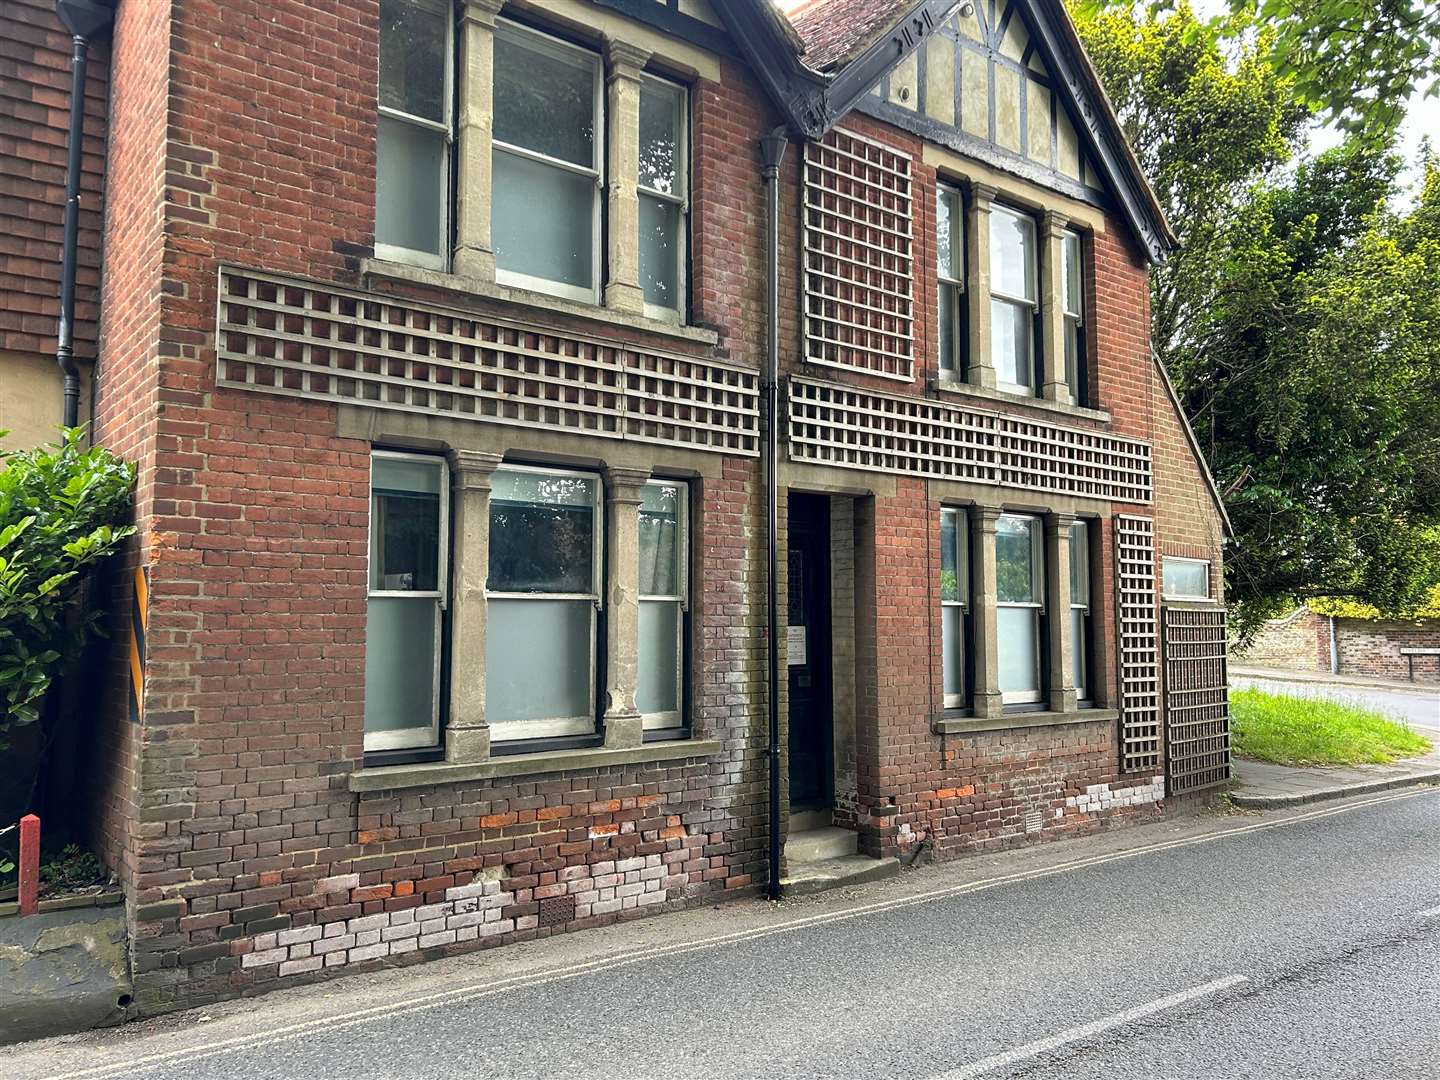 The house in Old Dover Road, Canterbury, borders the carriageway